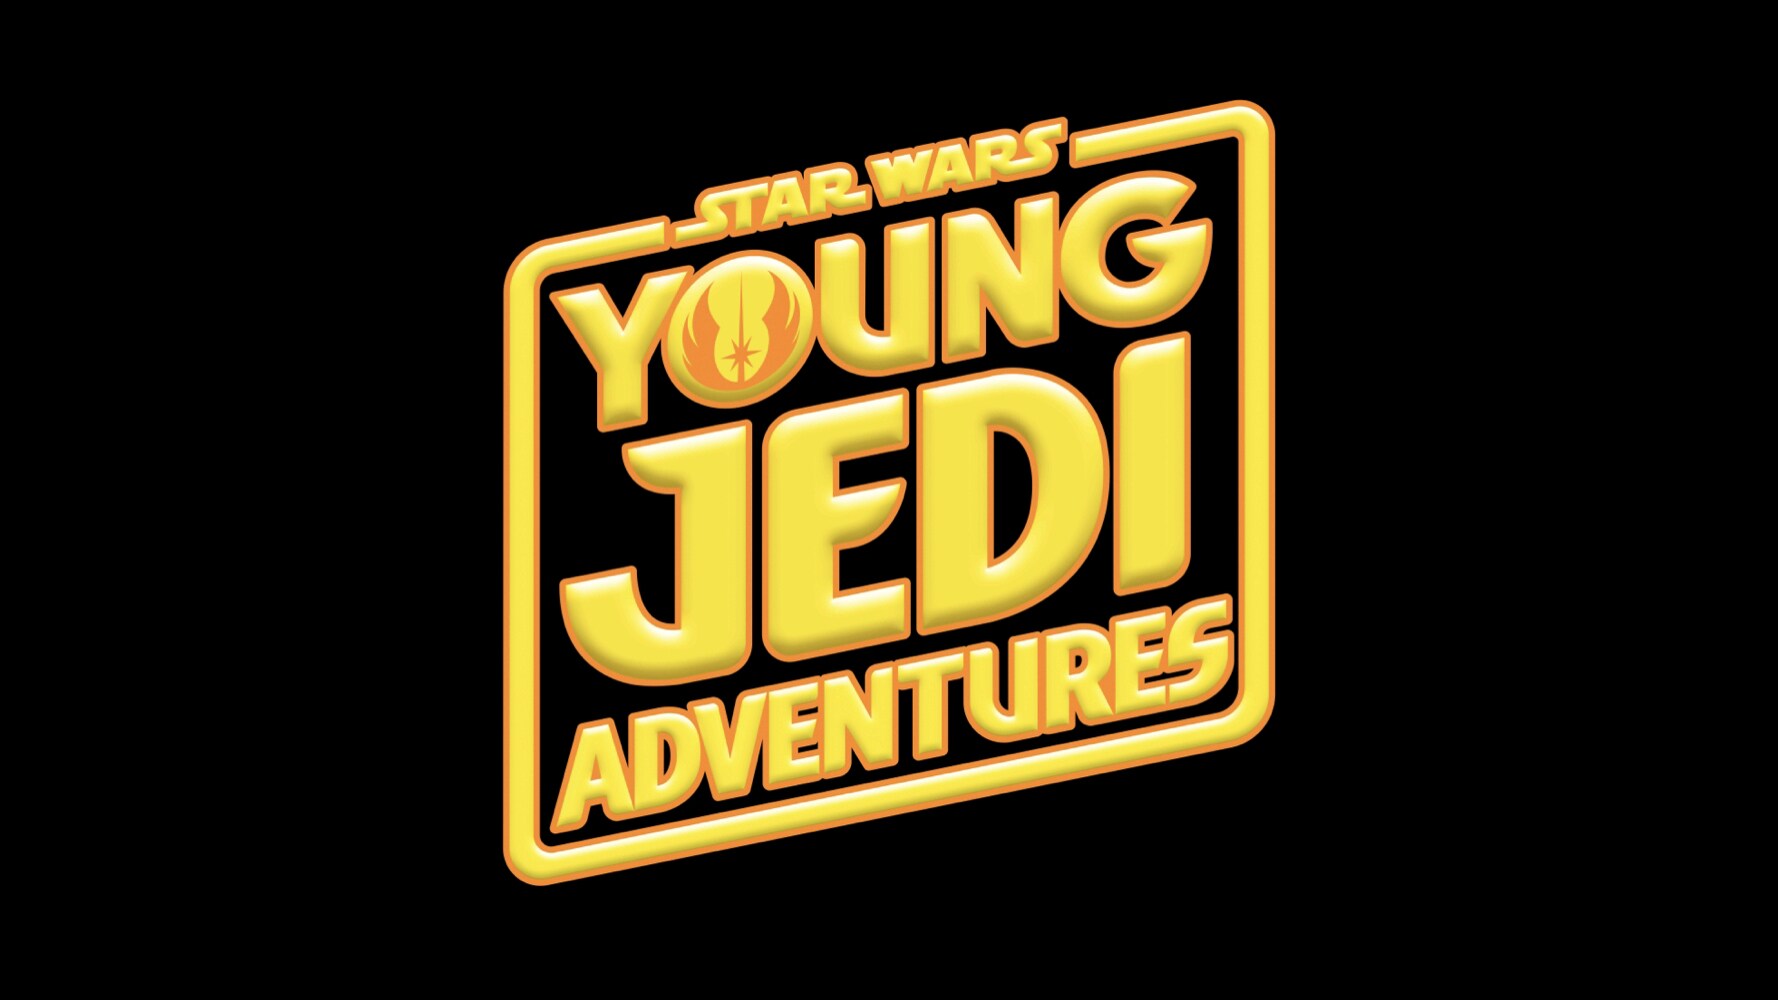 New “Star Wars: Young Jedi Adventures” Episodes Coming To Disney+ And Disney Junior August 2